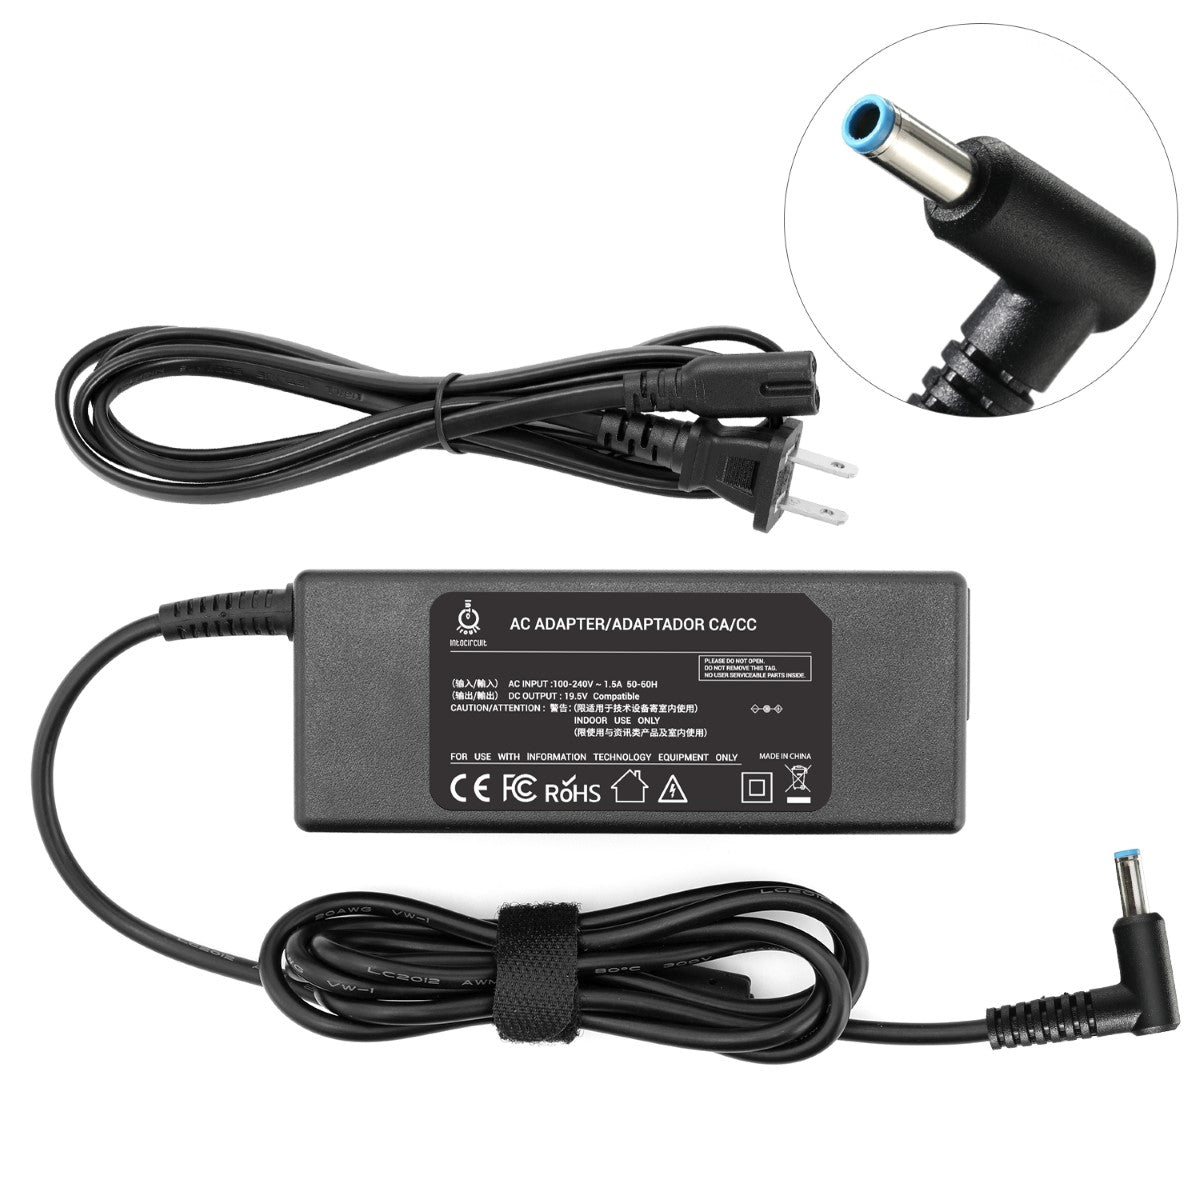 Charger for HP Envy Touchsmart 17-j043cl Notebook